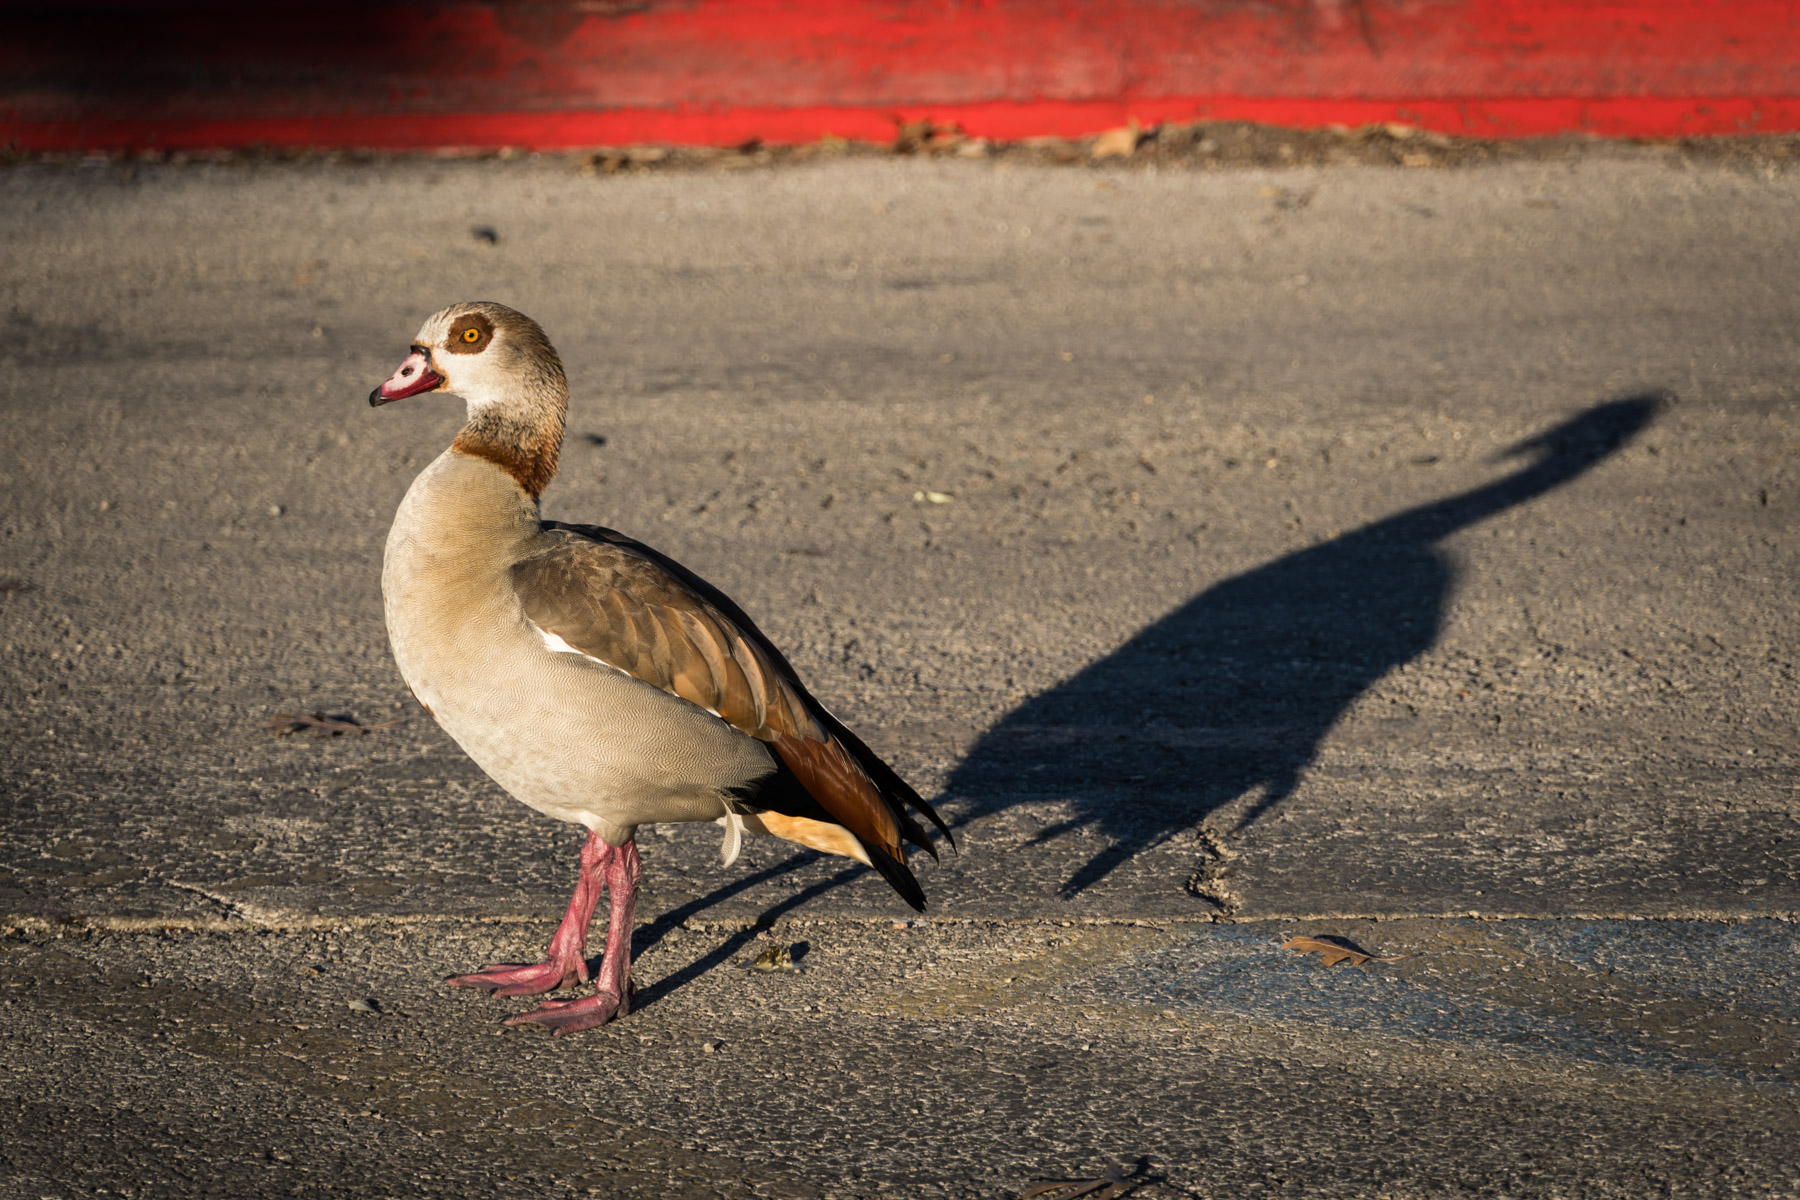 Egyptian goose and shadow on ground